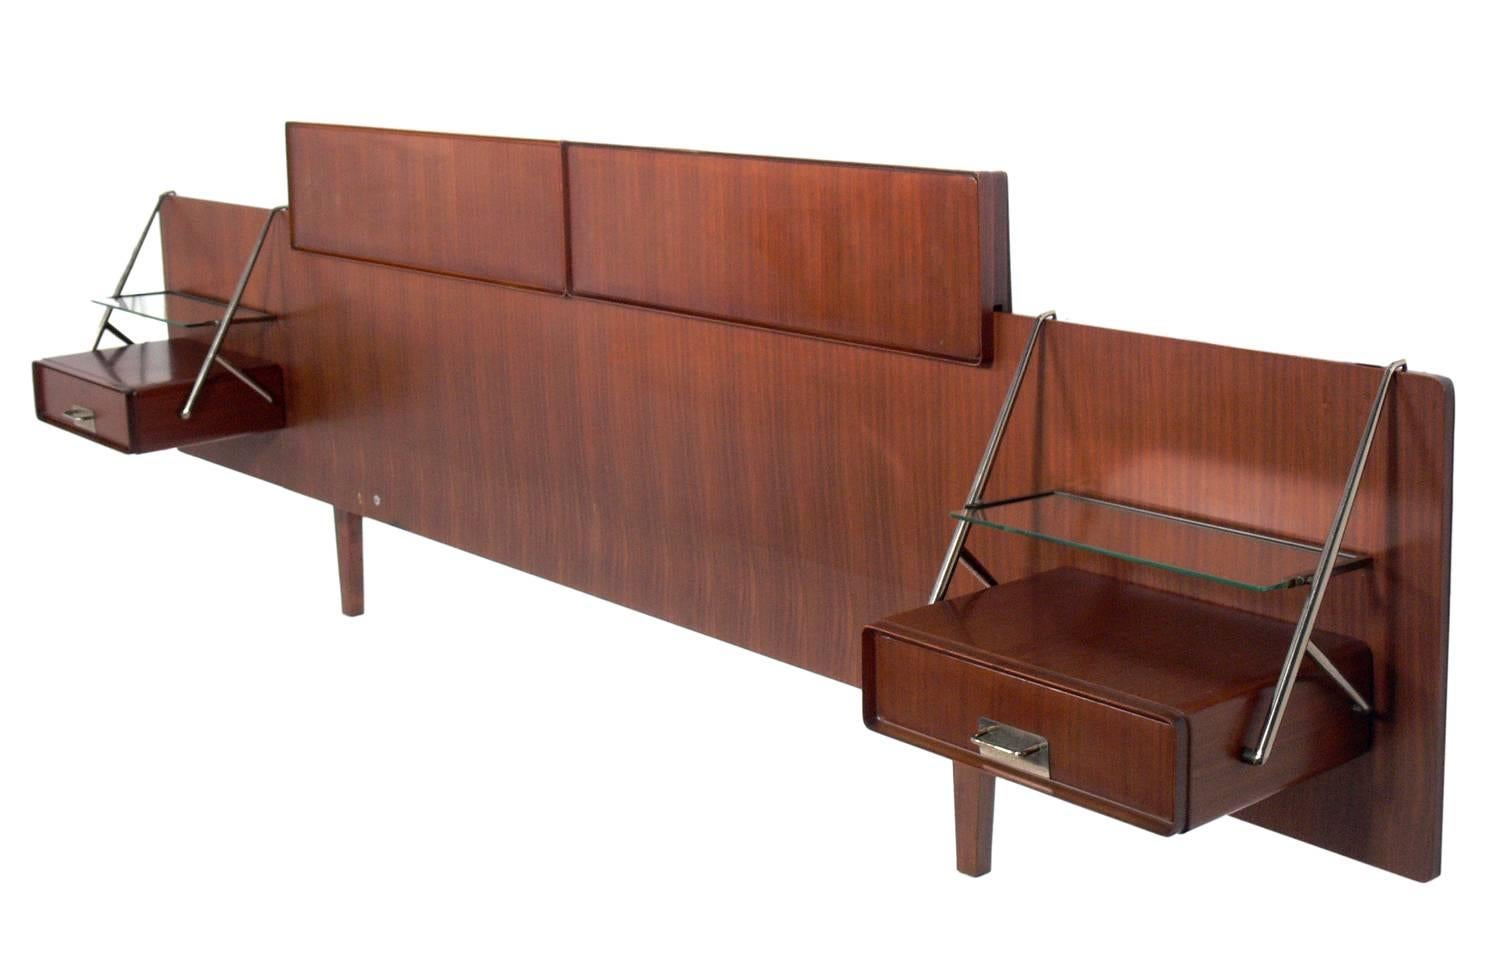 Modernist rosewood headboard with floating nightstands, designed by Silvio Cavatorta, Italian, circa 1950s. This will work with most standard bed frames.